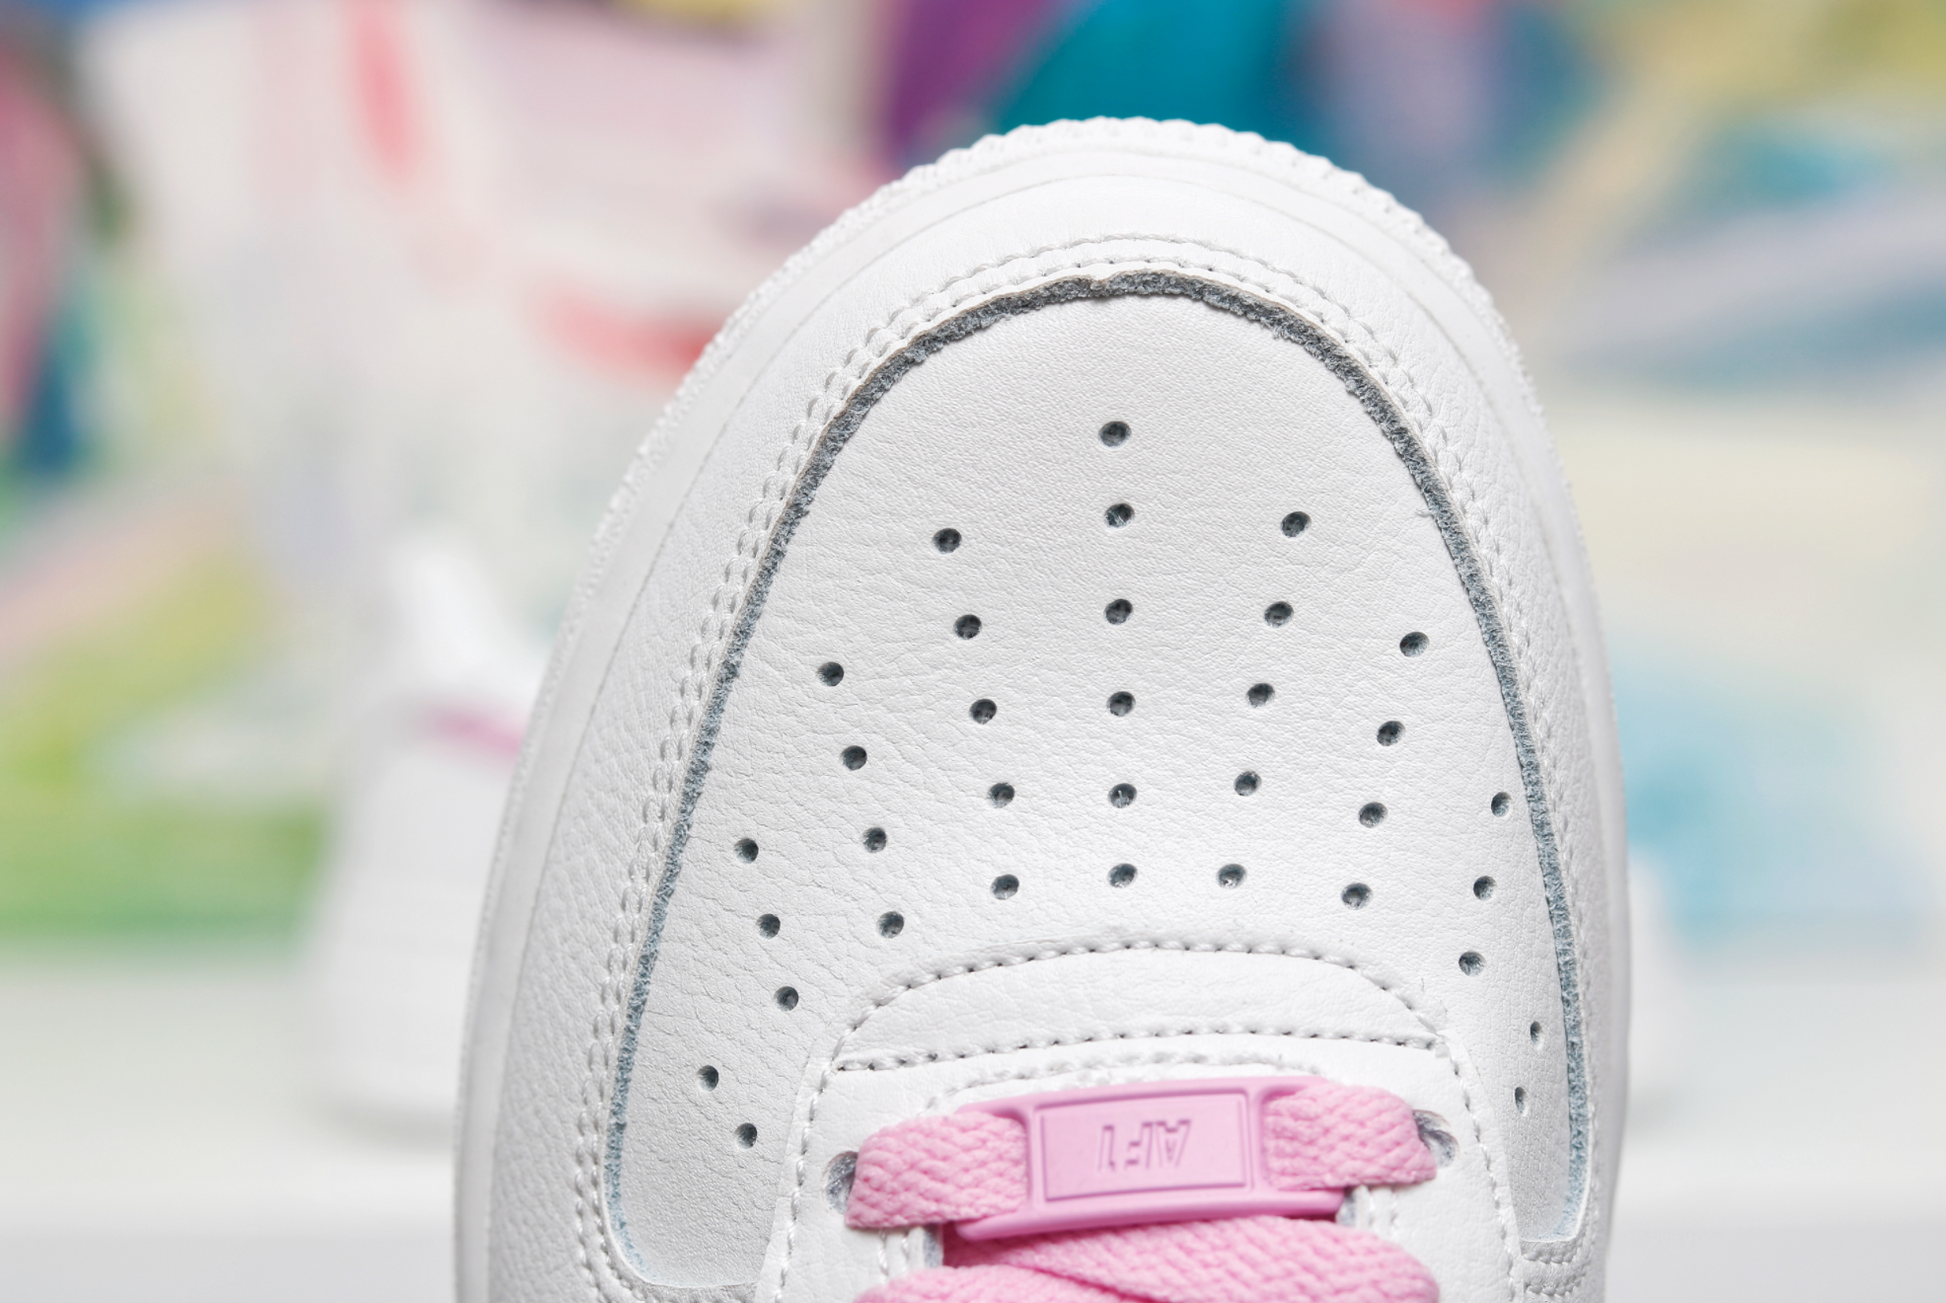 Air Force 1 AF1 Pink - whatever on 